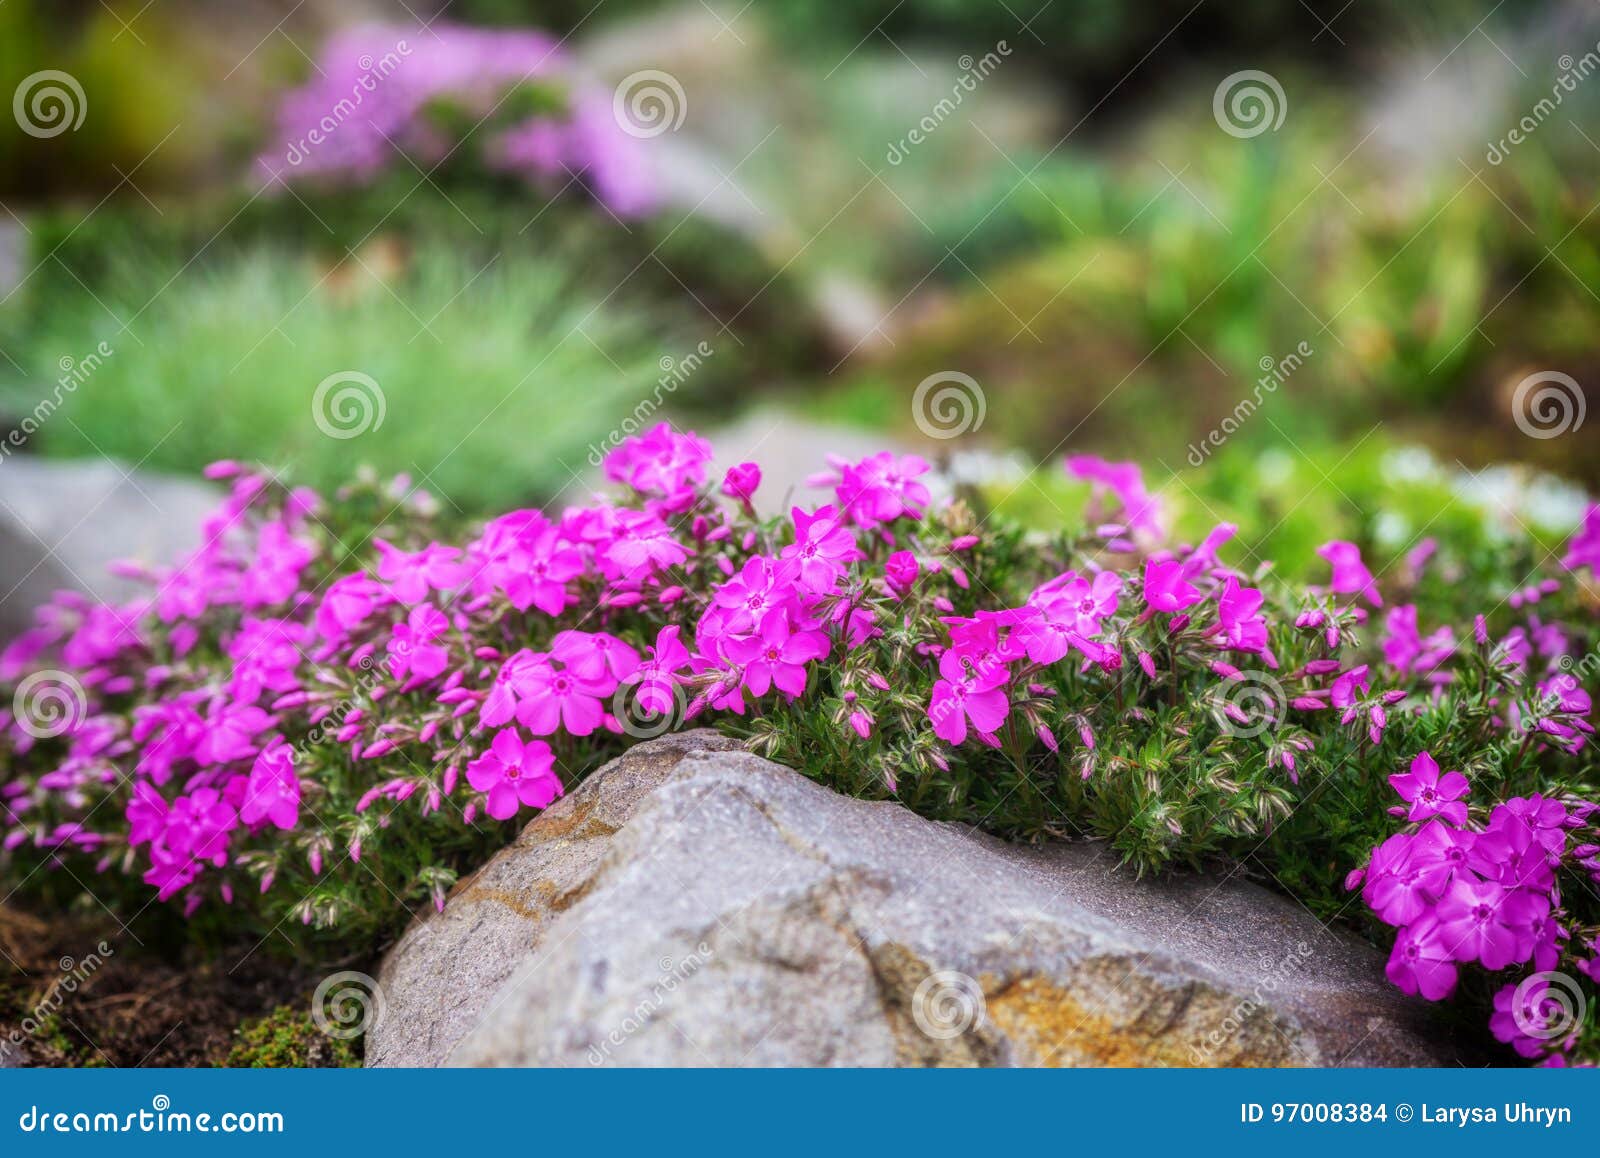 Rockery with Small Pretty Violet Phlox Flowers Stock Photo - Image of  flowers, background: 97008384